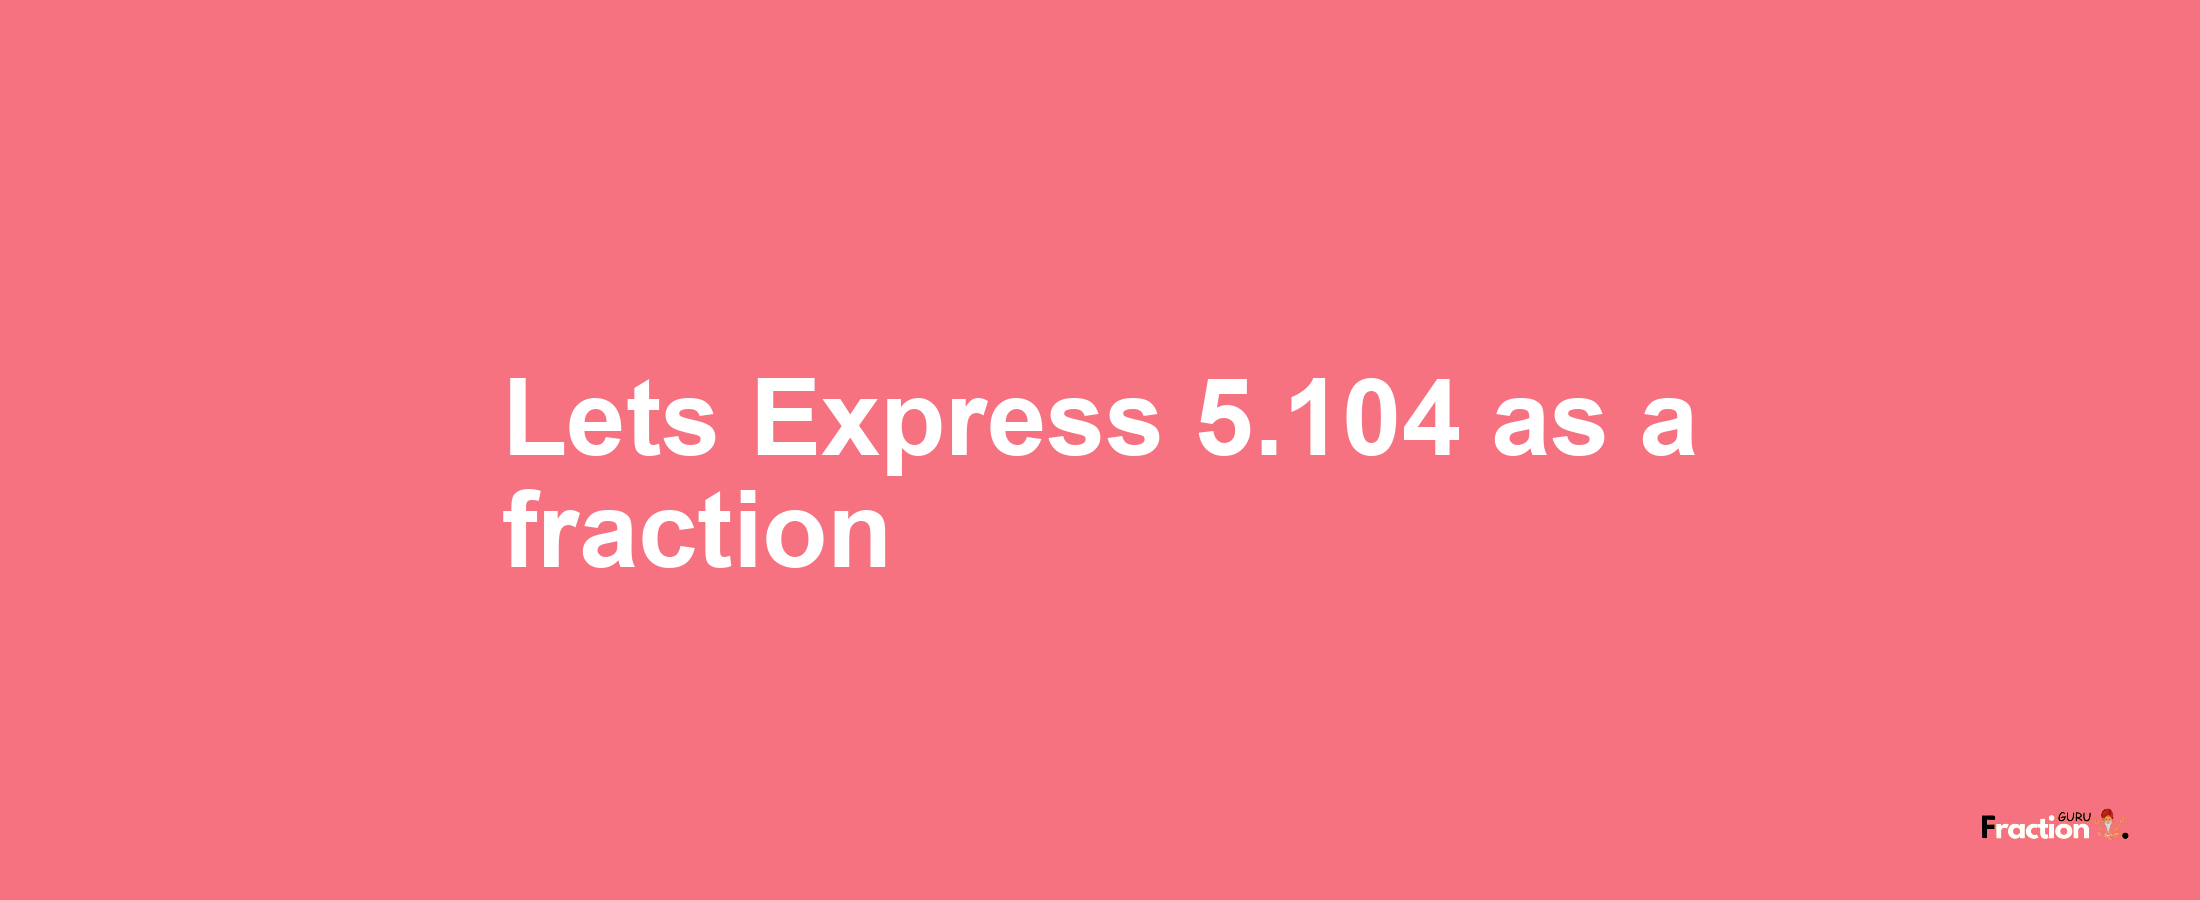 Lets Express 5.104 as afraction